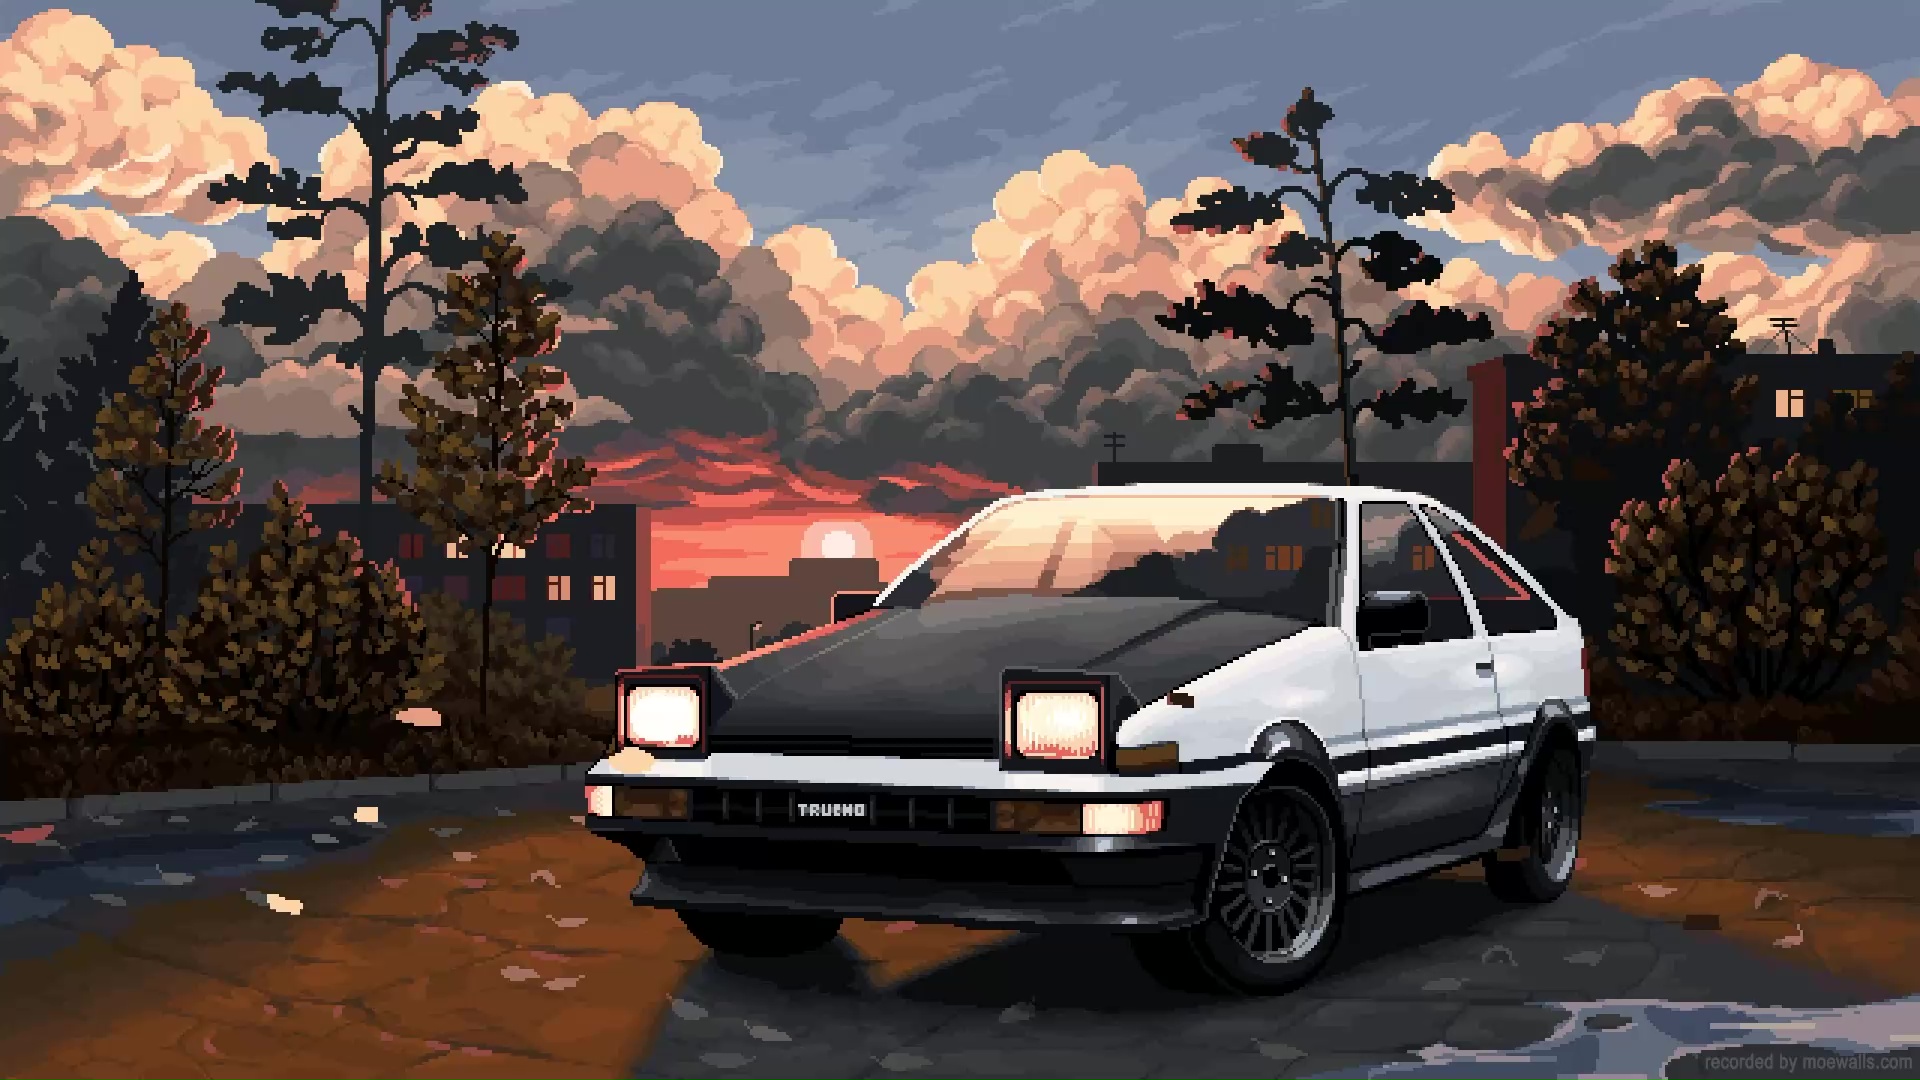 Download Enjoy the Ride in the AE86 Wallpaper | Wallpapers.com